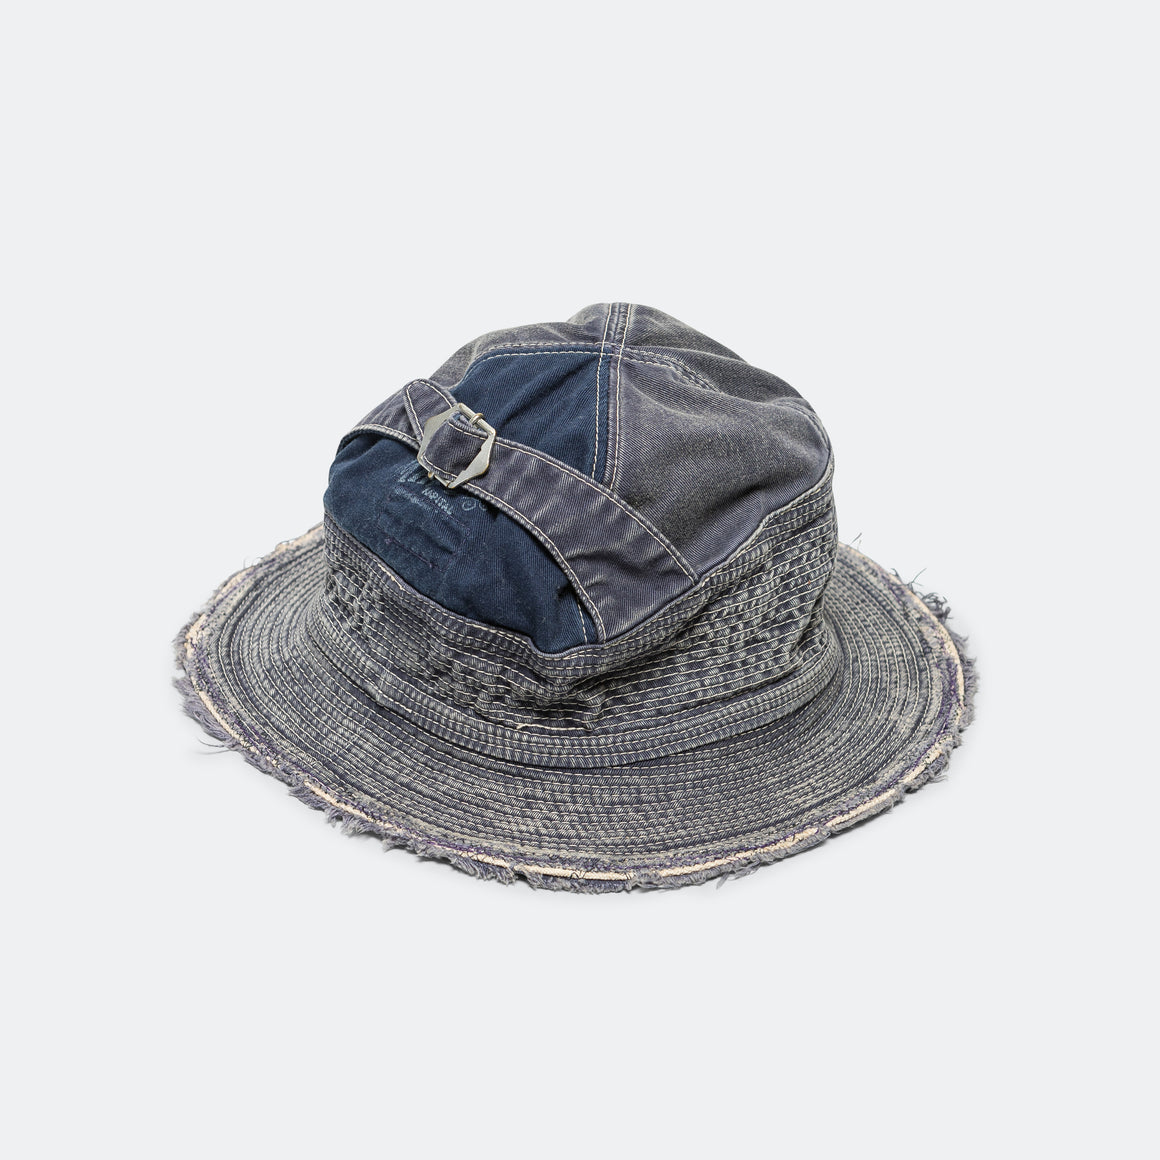 Kapital - 11.5oz THE OLD MAN AND THE SEA Hat (SOFT CRASH REMAKE) - Navy - UP THERE